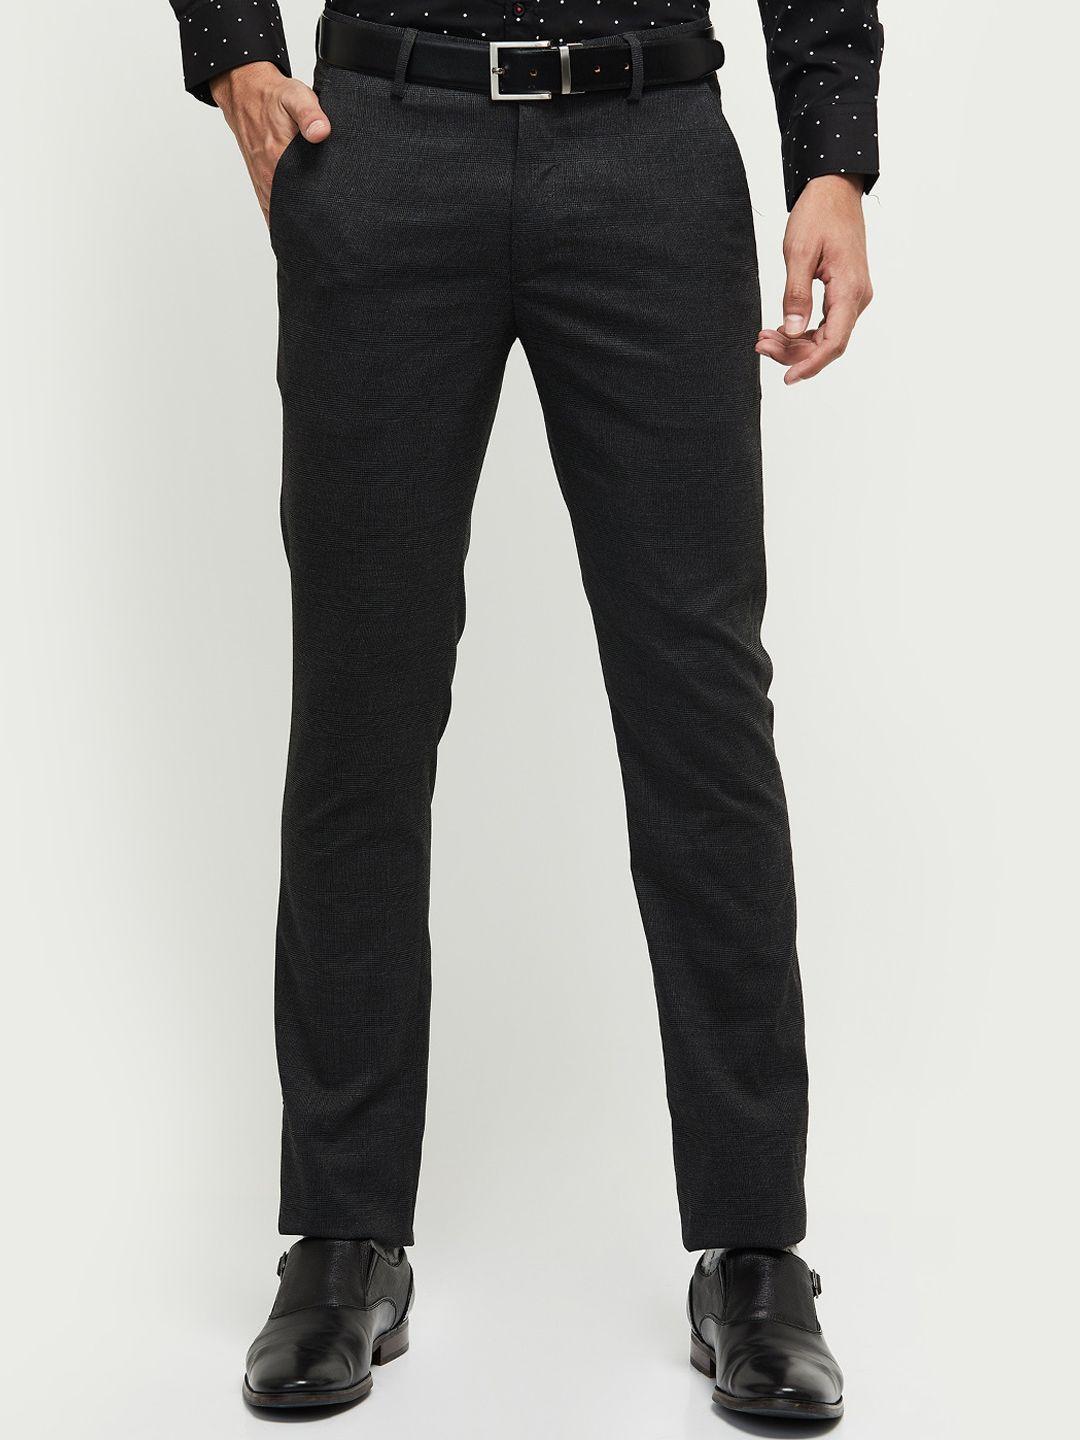 max-men-charcoal-trousers